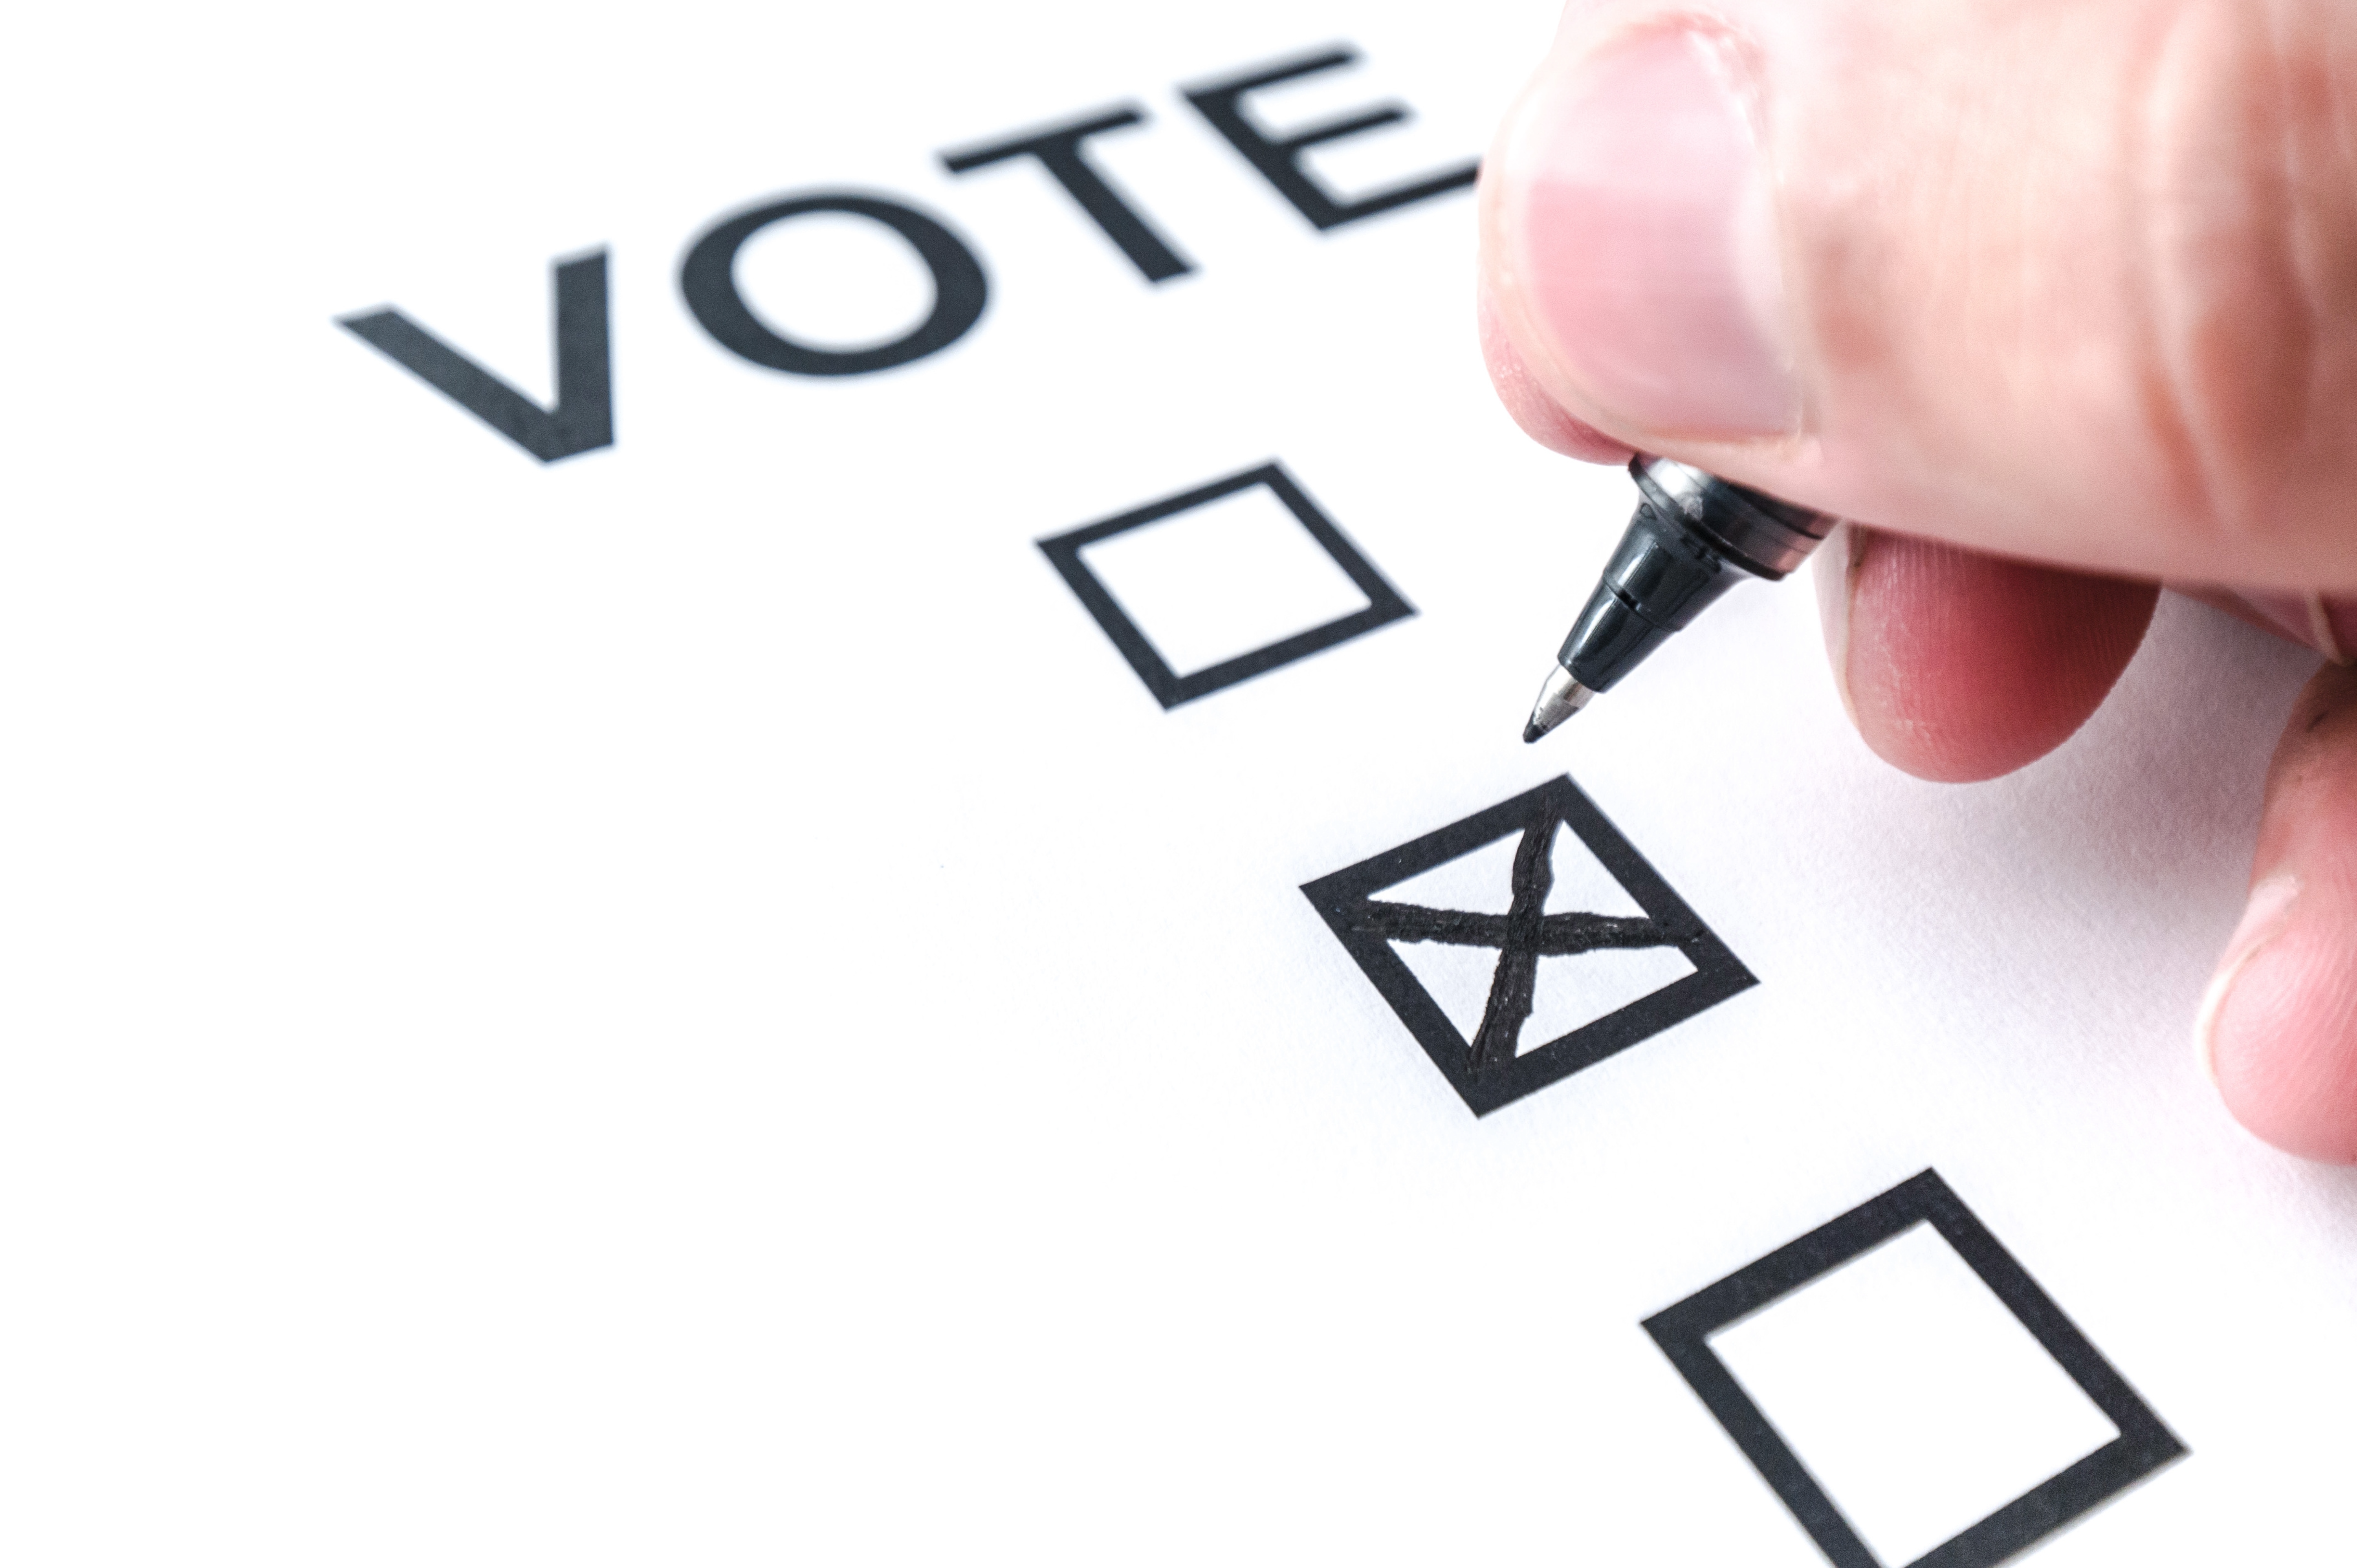 Blank stock image of a Ballot with a hand marking an X vote